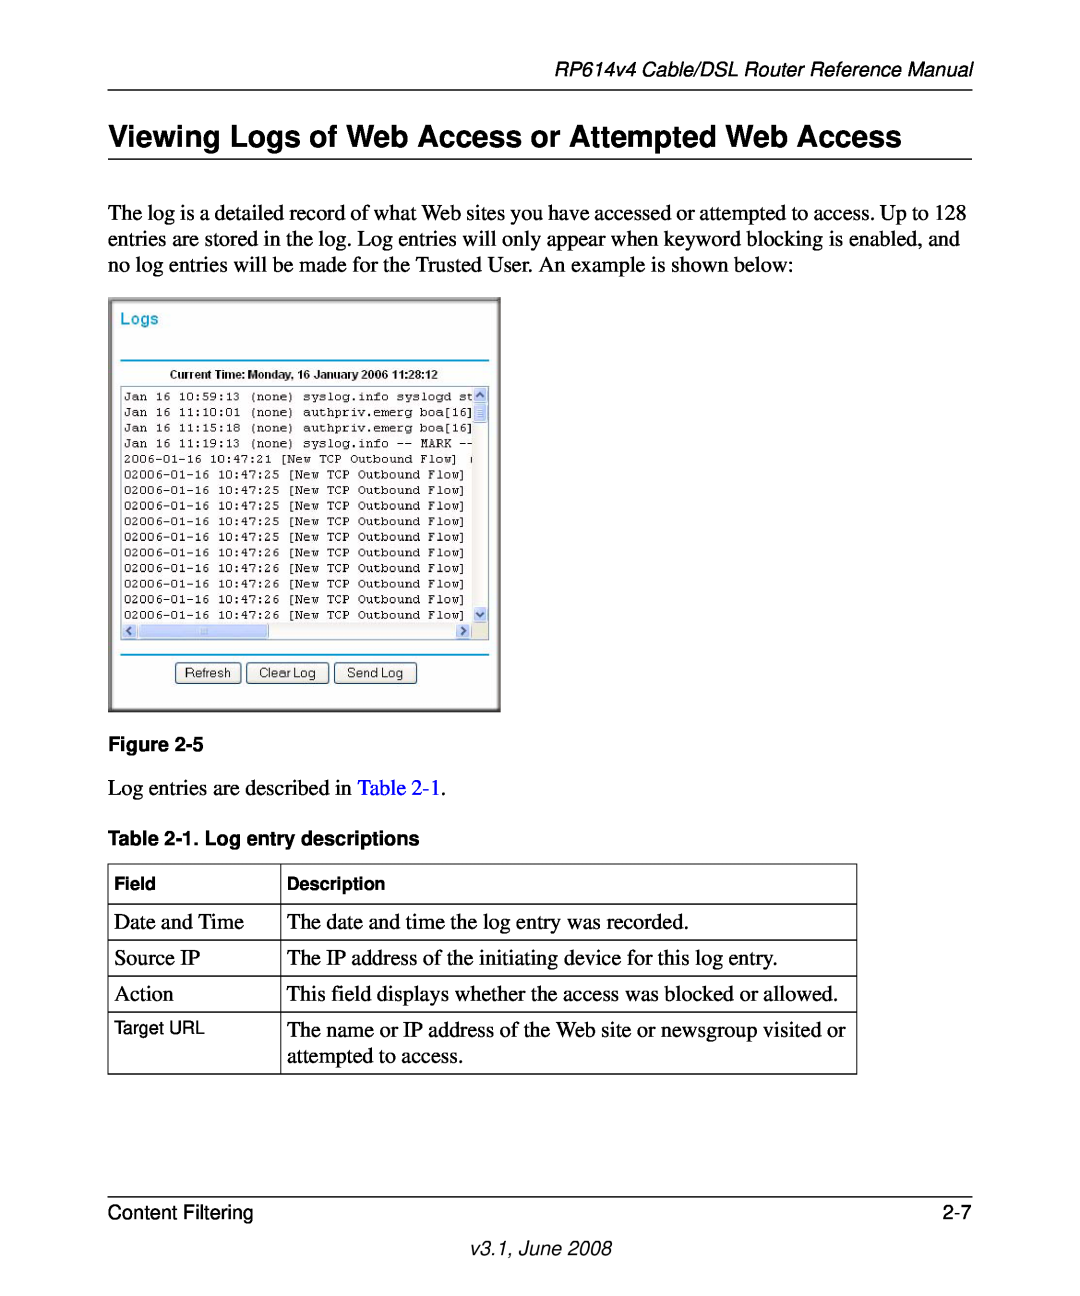 NETGEAR RP614 v4 manual Viewing Logs of Web Access or Attempted Web Access 